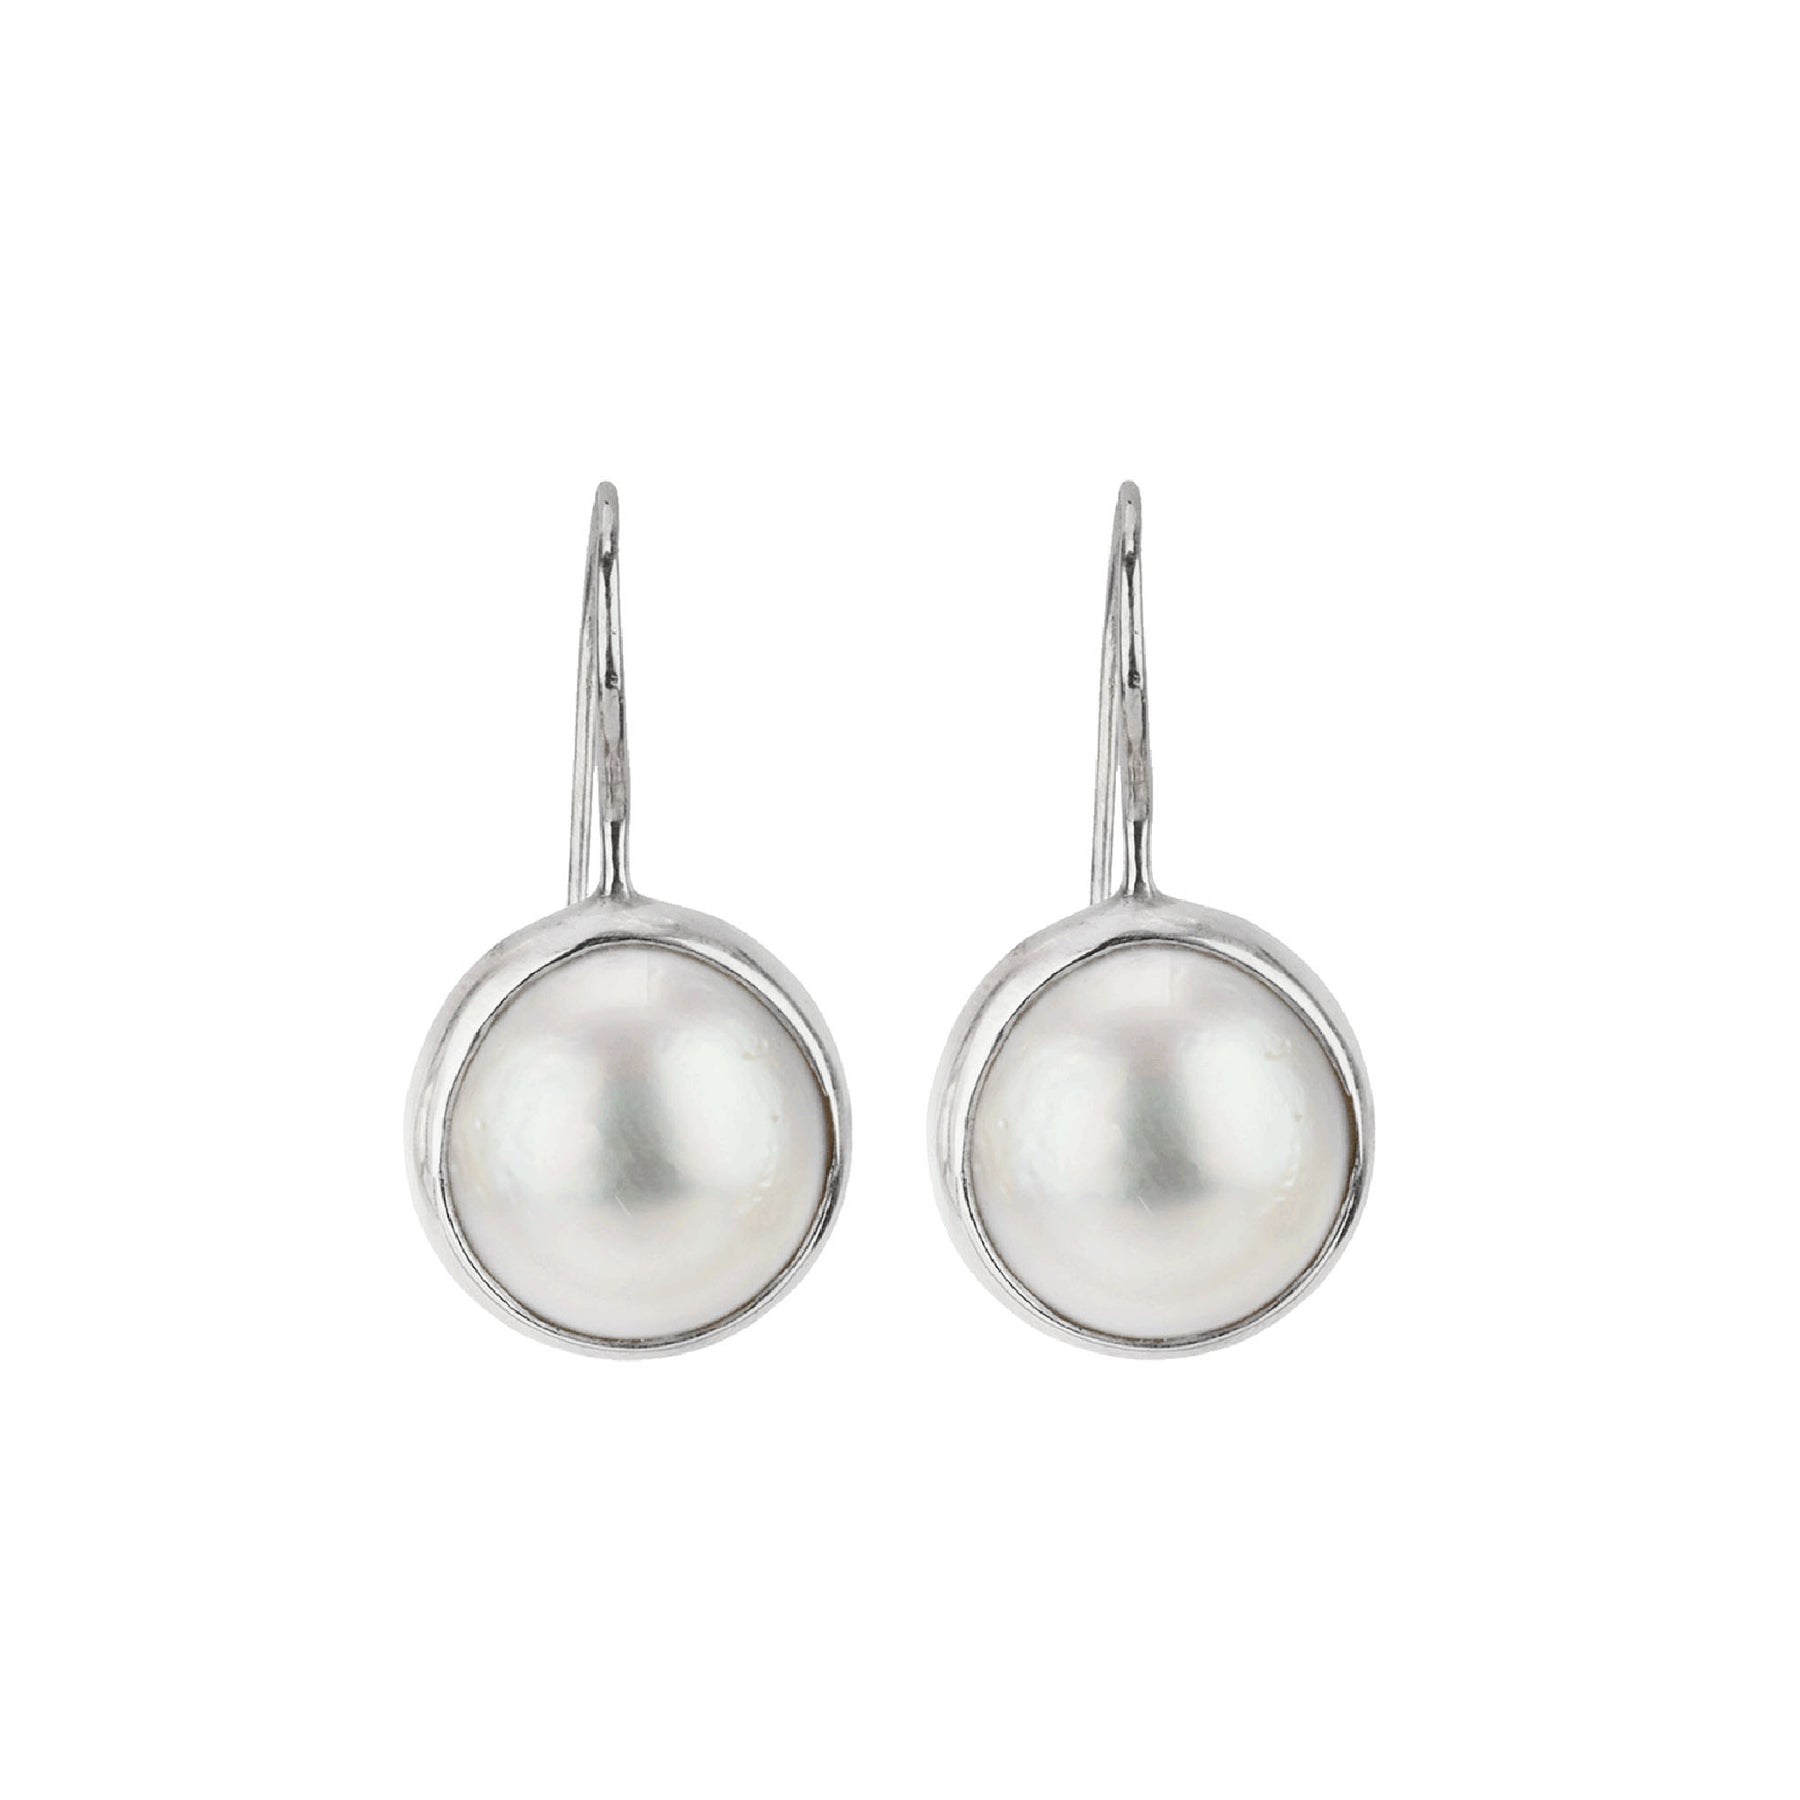 Silver Earrings with South Sea Pearls